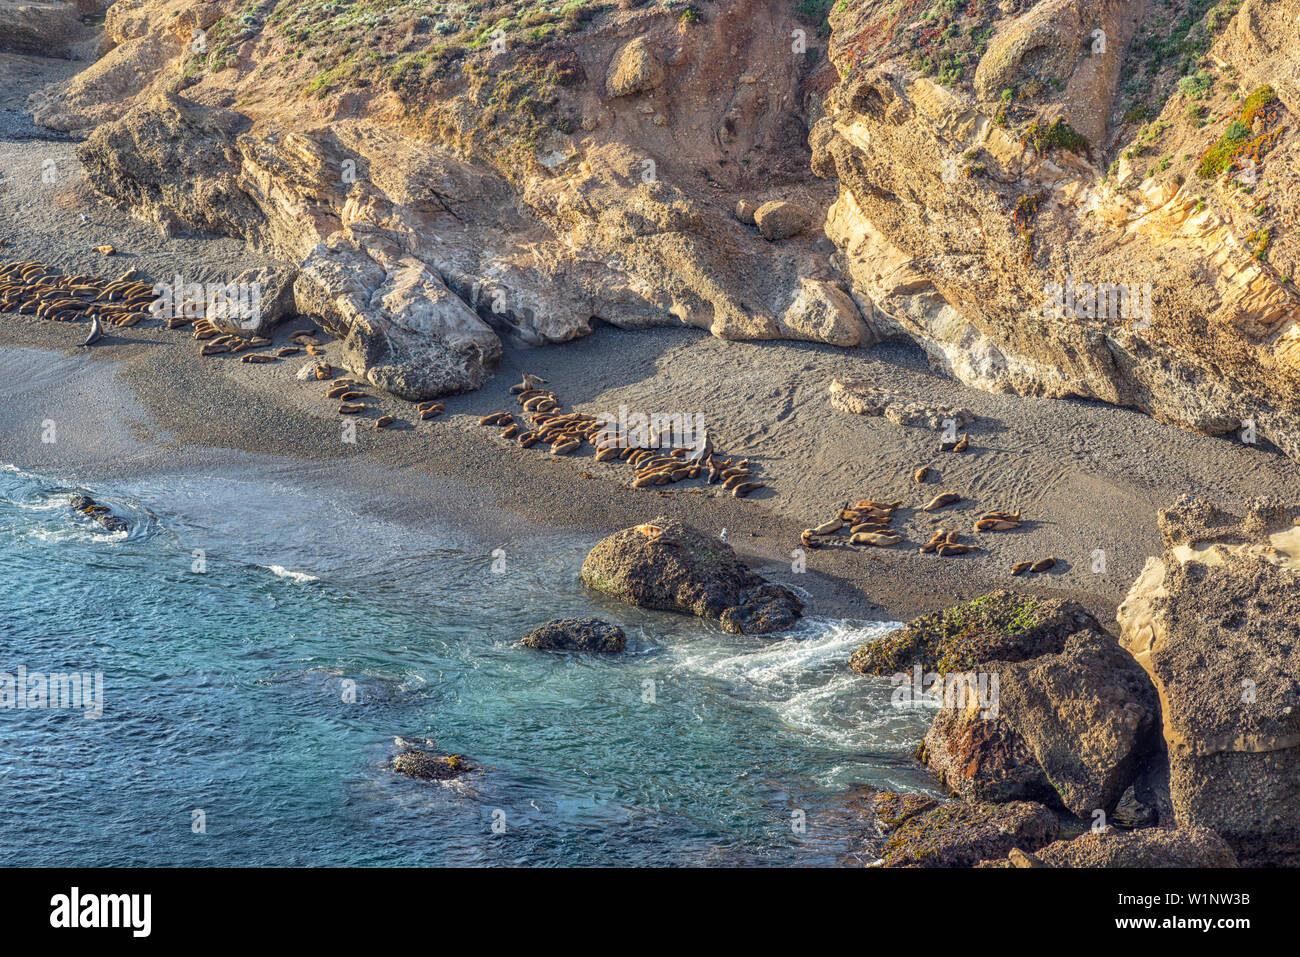 Seals lying on a beach. Point Lobos State Reserve, Carmel, California, United States. Stock Photo